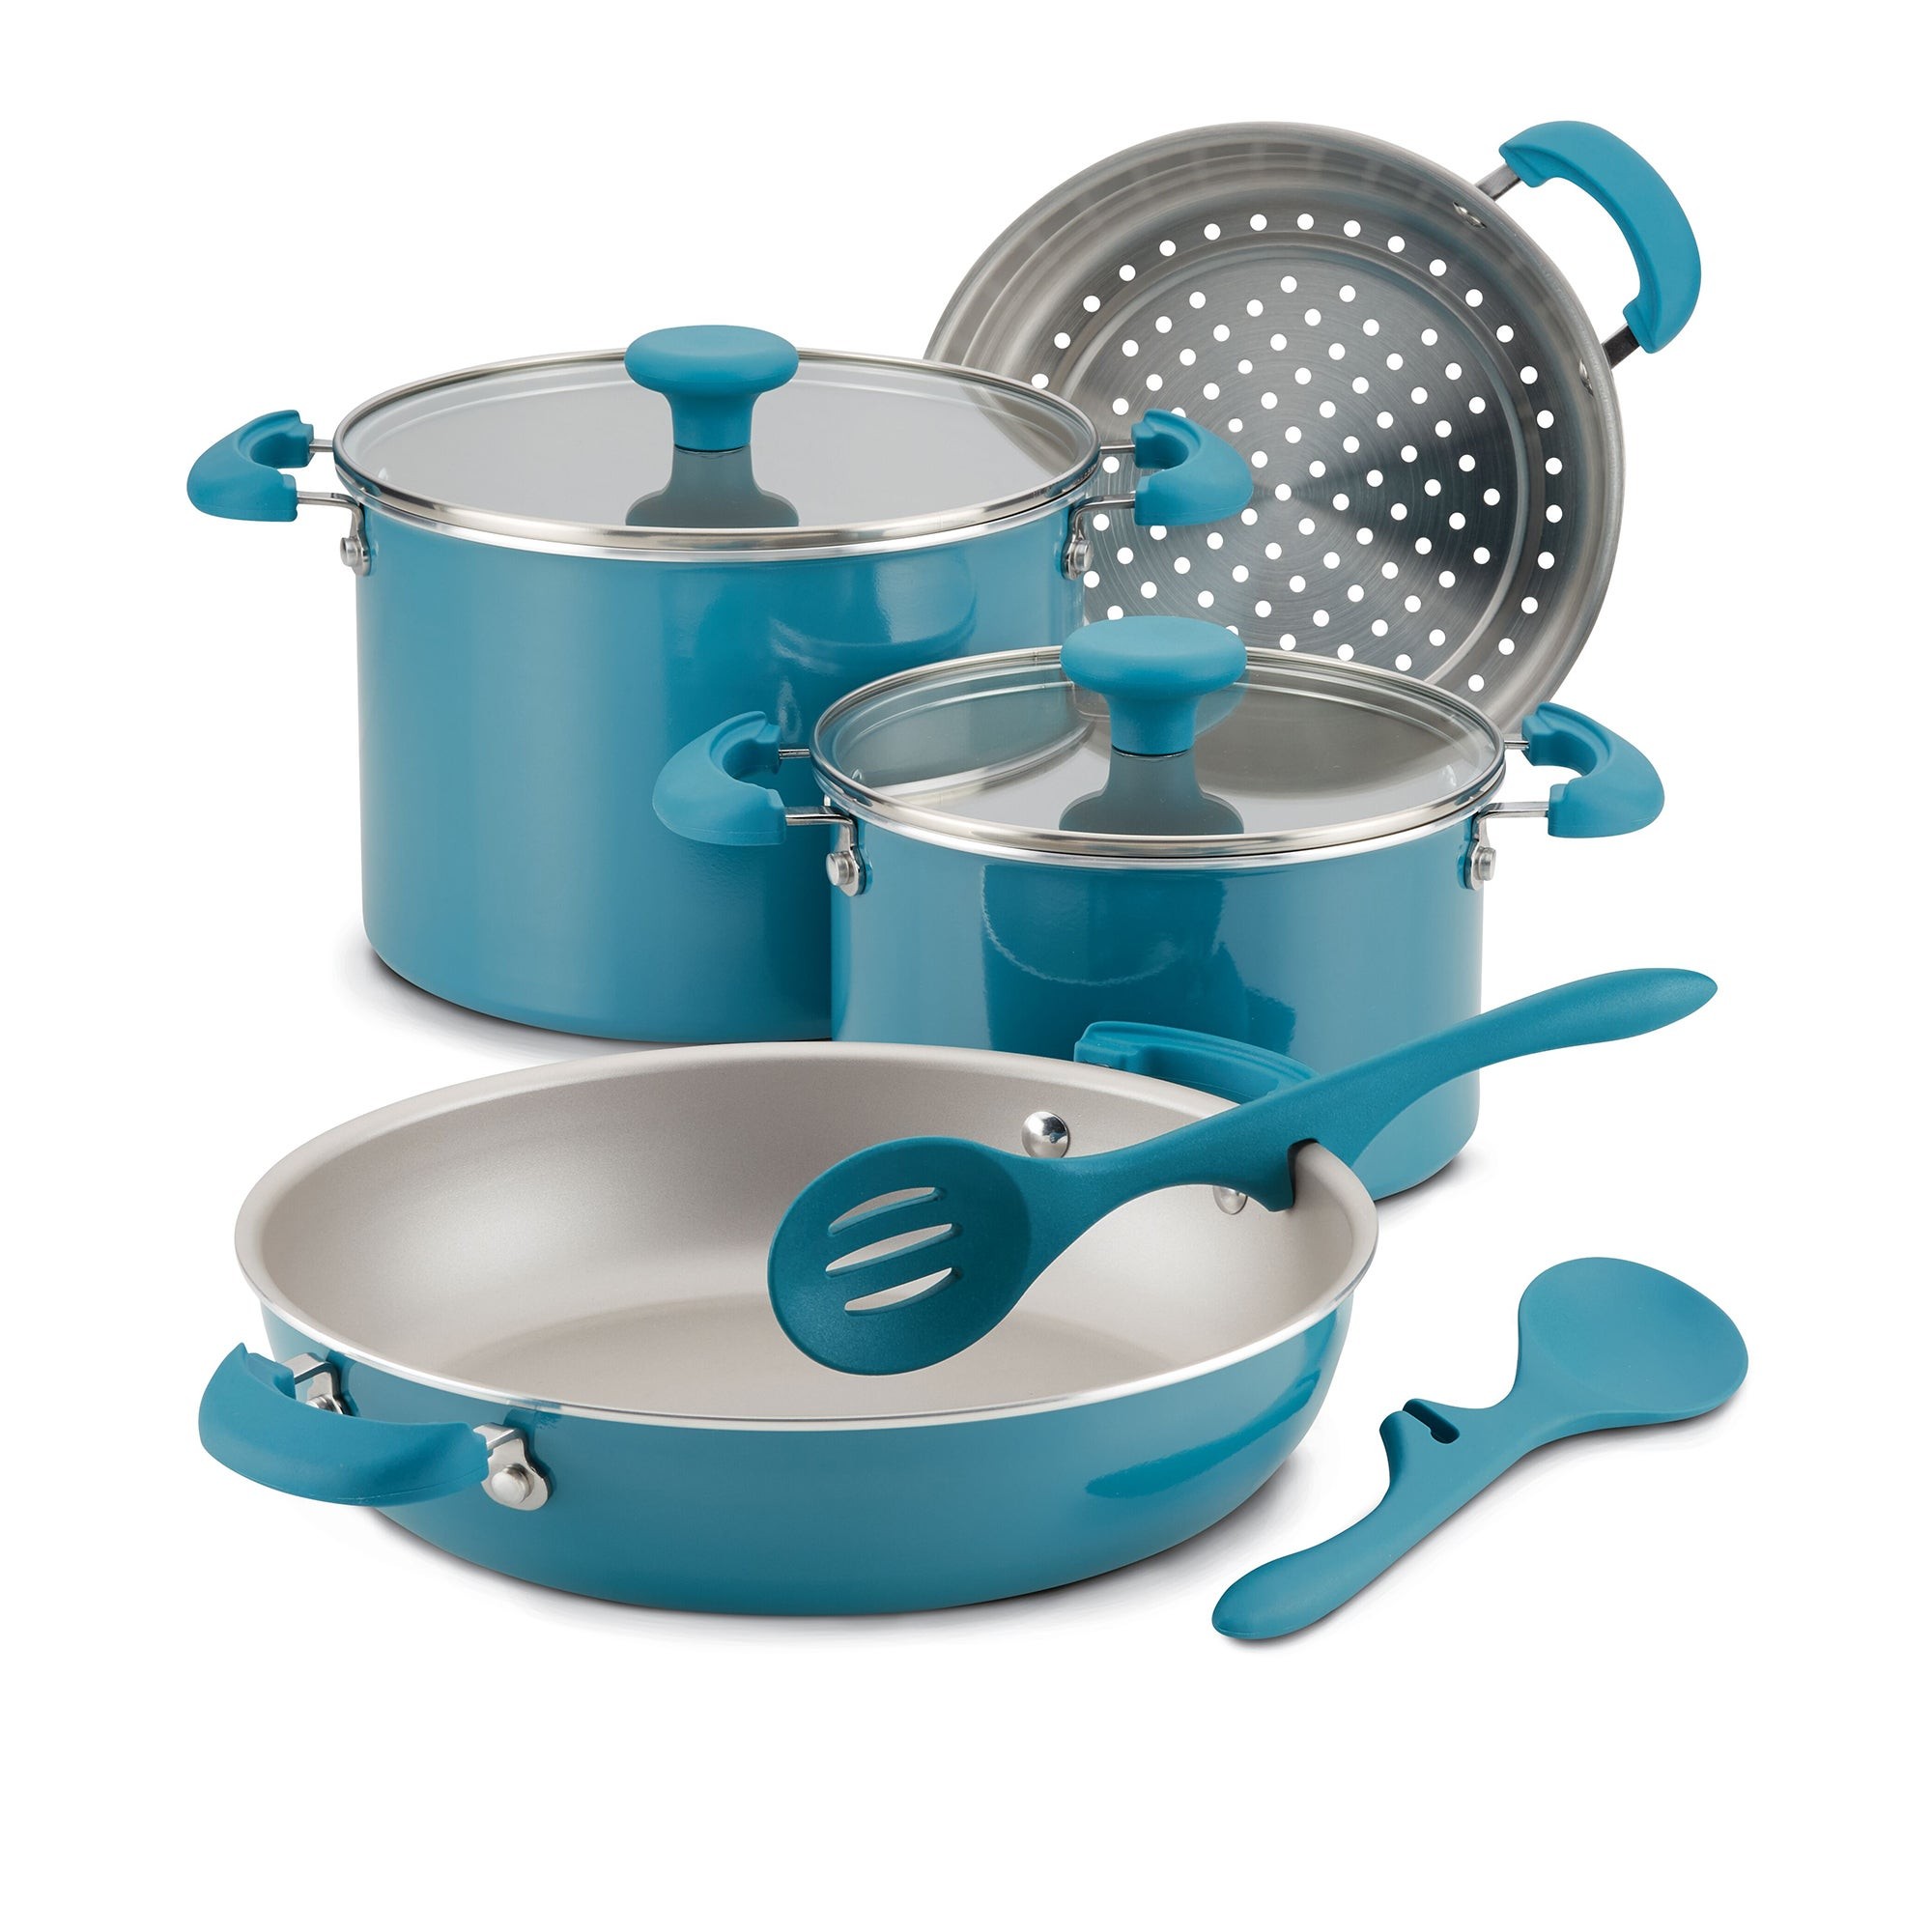 8pc Get Cooking! Stackable Nonstick Cookware Set Turquoise